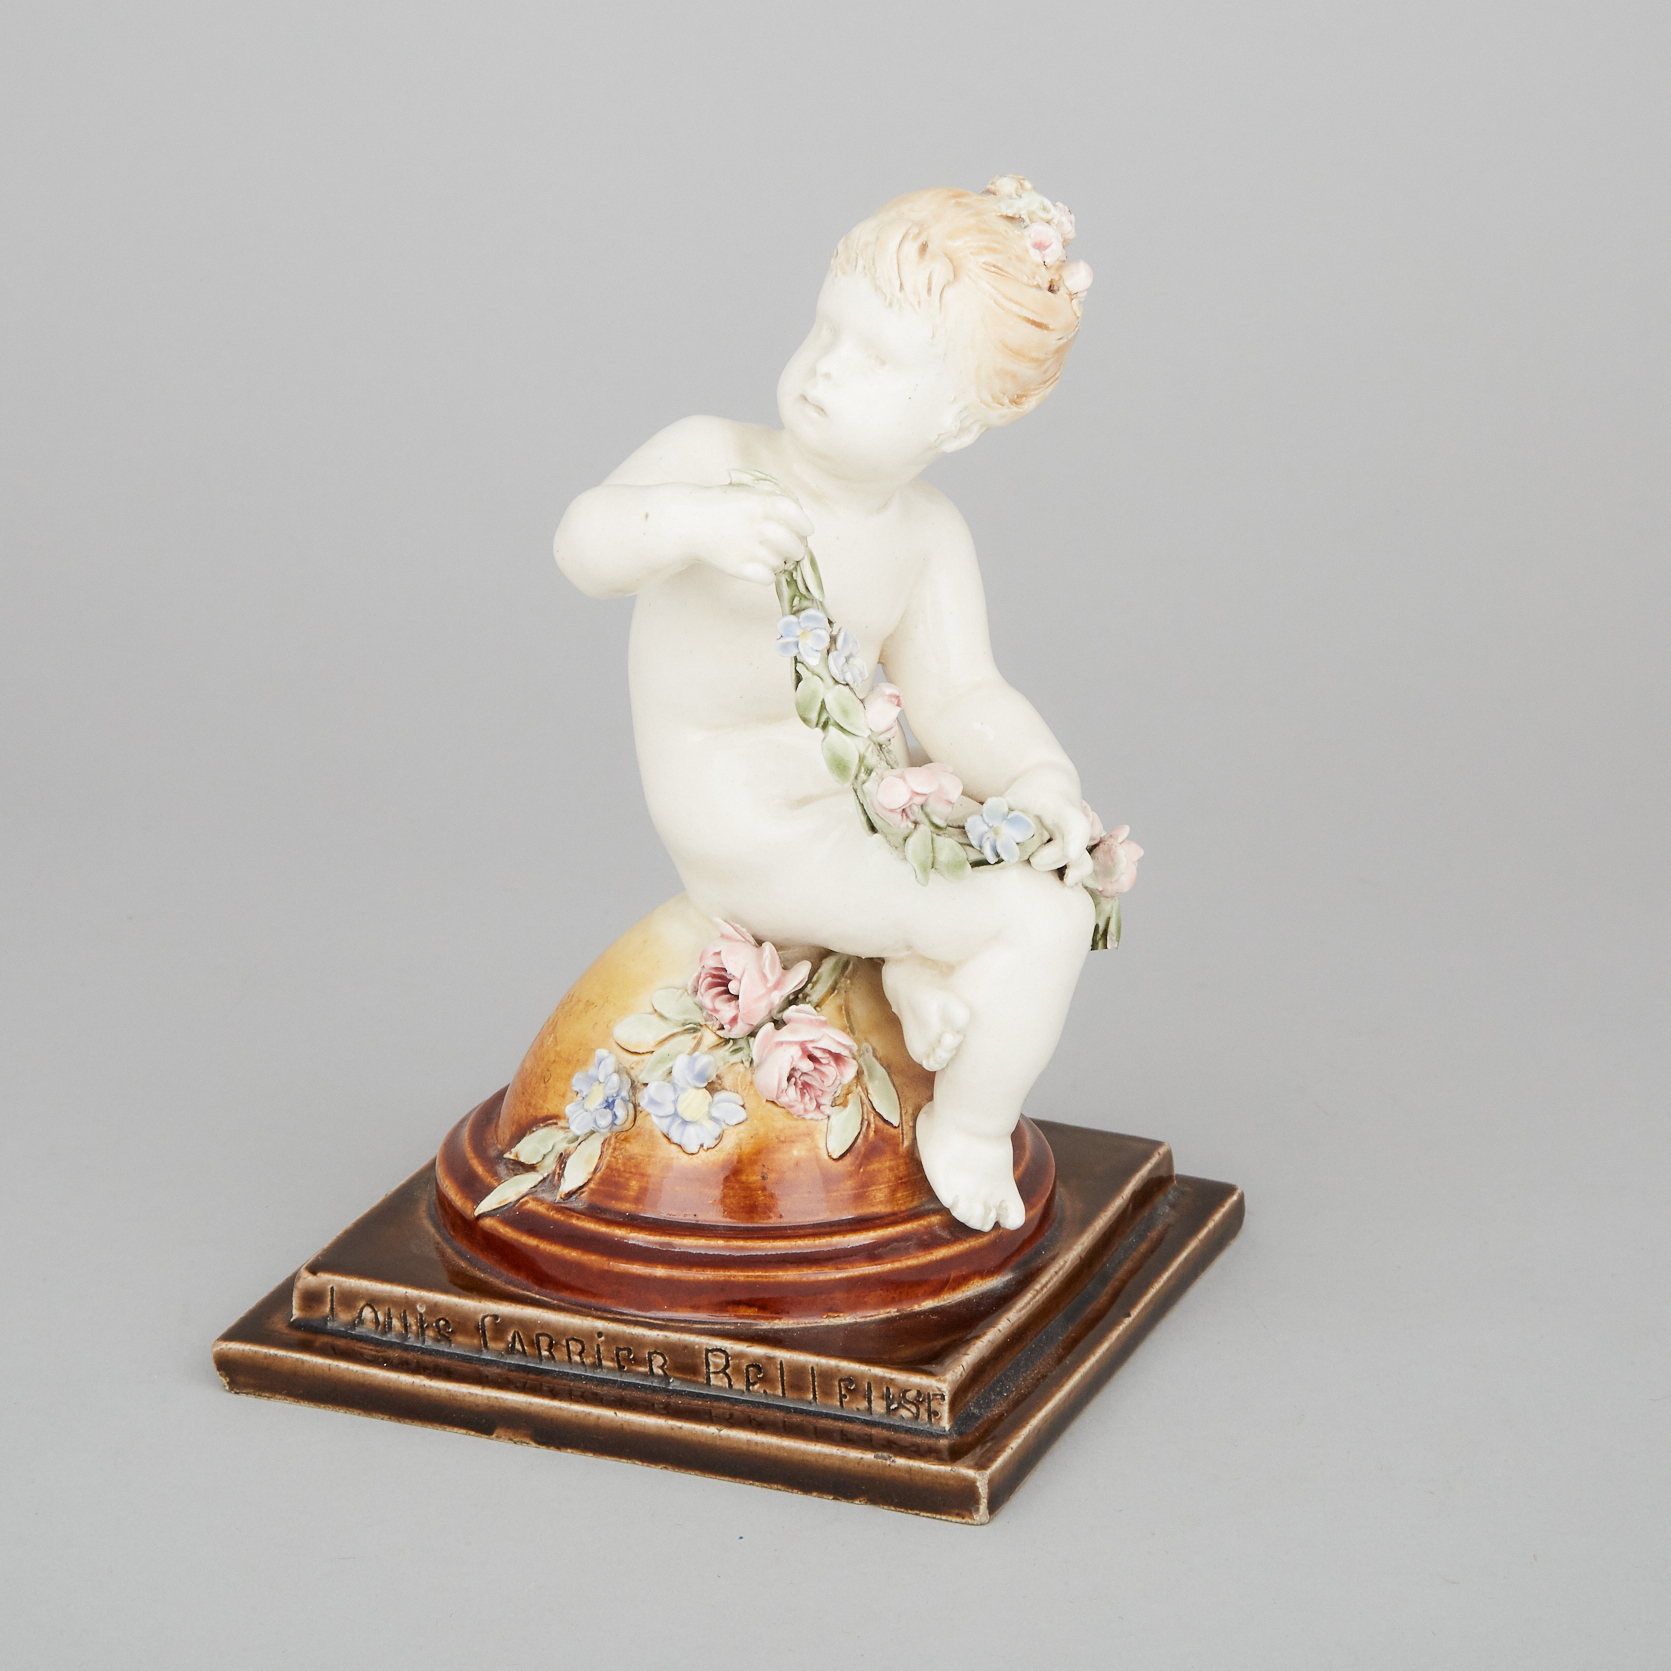 Choisy le Roi Figure of Seated Child, Louis Carrier Belleuse, late 19th century